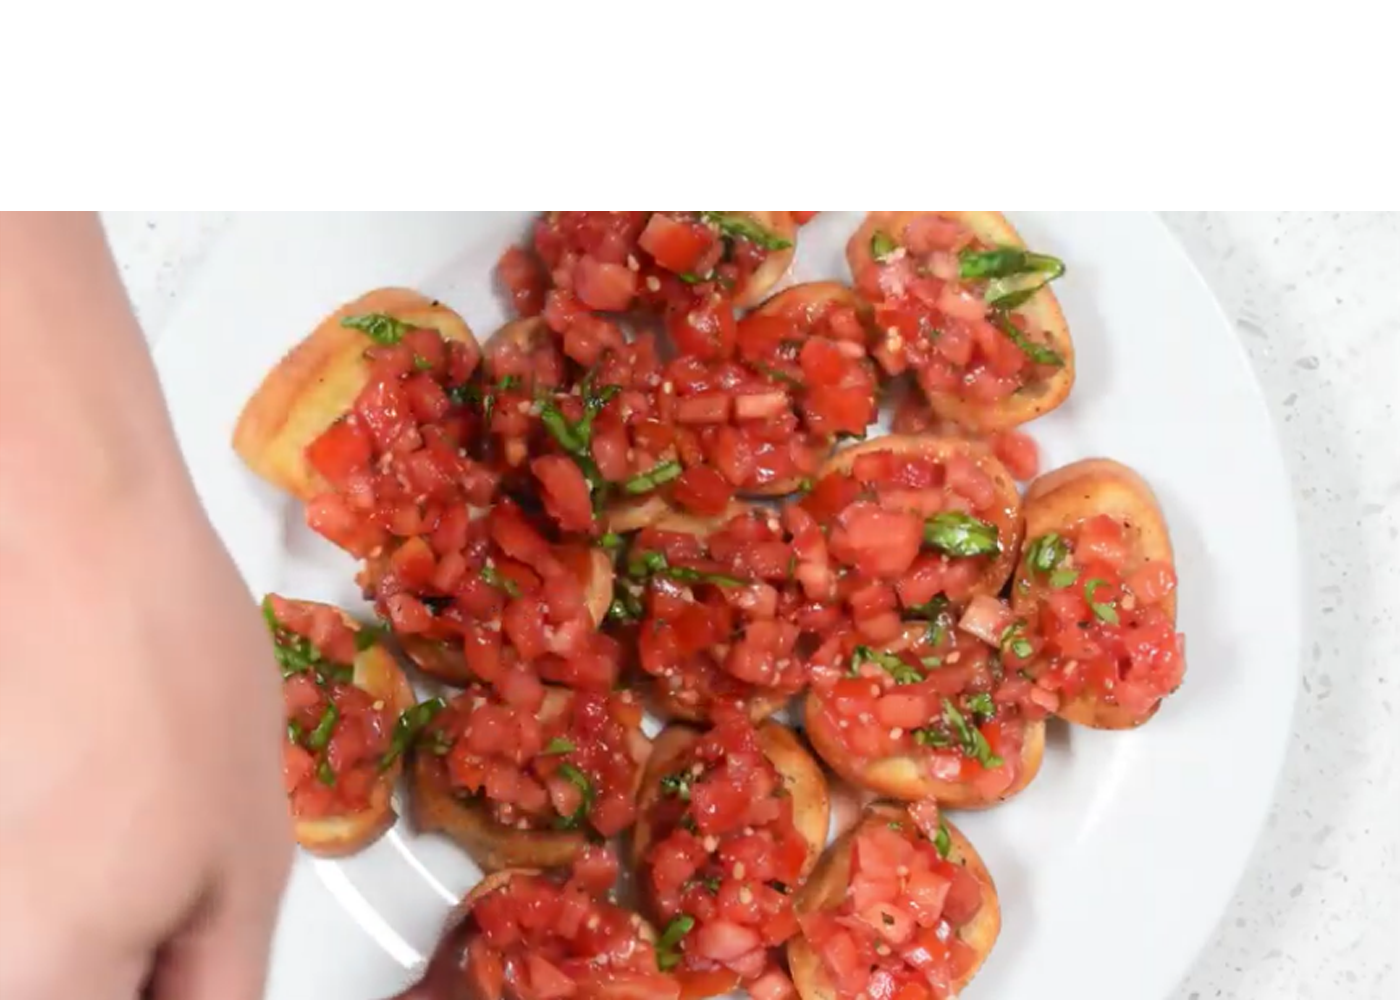 chopped tomatoes and basil on small slices of bread